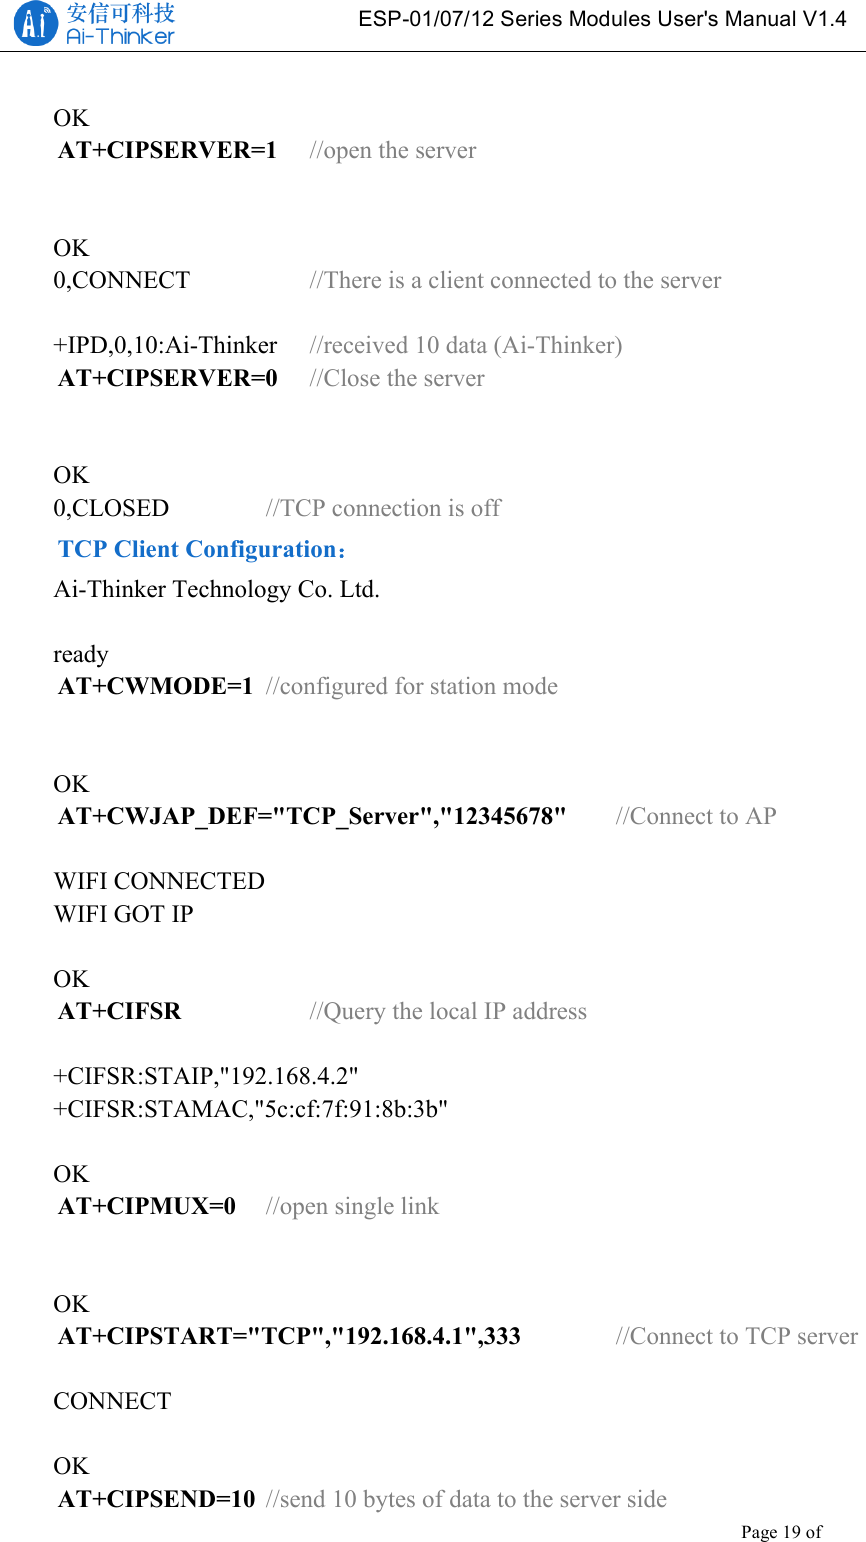   ESP-01/07/12 Series Modules User&apos;s Manual V1.4 Copyright © 2017 Shenzhen Ai-Thinker Technology Co., Ltd All Rights Reserved Page 19 of 23    OK AT+CIPSERVER=1  //open the server   OK 0,CONNECT      //There is a client connected to the server  +IPD,0,10:Ai-Thinker  //received 10 data (Ai-Thinker) AT+CIPSERVER=0  //Close the server   OK 0,CLOSED     //TCP connection is off TCP Client Configuration： Ai-Thinker Technology Co. Ltd.  ready AT+CWMODE=1 //configured for station mode   OK AT+CWJAP_DEF=&quot;TCP_Server&quot;,&quot;12345678&quot;   //Connect to AP  WIFI CONNECTED WIFI GOT IP  OK AT+CIFSR   //Query the local IP address  +CIFSR:STAIP,&quot;192.168.4.2&quot; +CIFSR:STAMAC,&quot;5c:cf:7f:91:8b:3b&quot;  OK AT+CIPMUX=0 //open single link   OK AT+CIPSTART=&quot;TCP&quot;,&quot;192.168.4.1&quot;,333   //Connect to TCP server  CONNECT  OK AT+CIPSEND=10 //send 10 bytes of data to the server side 